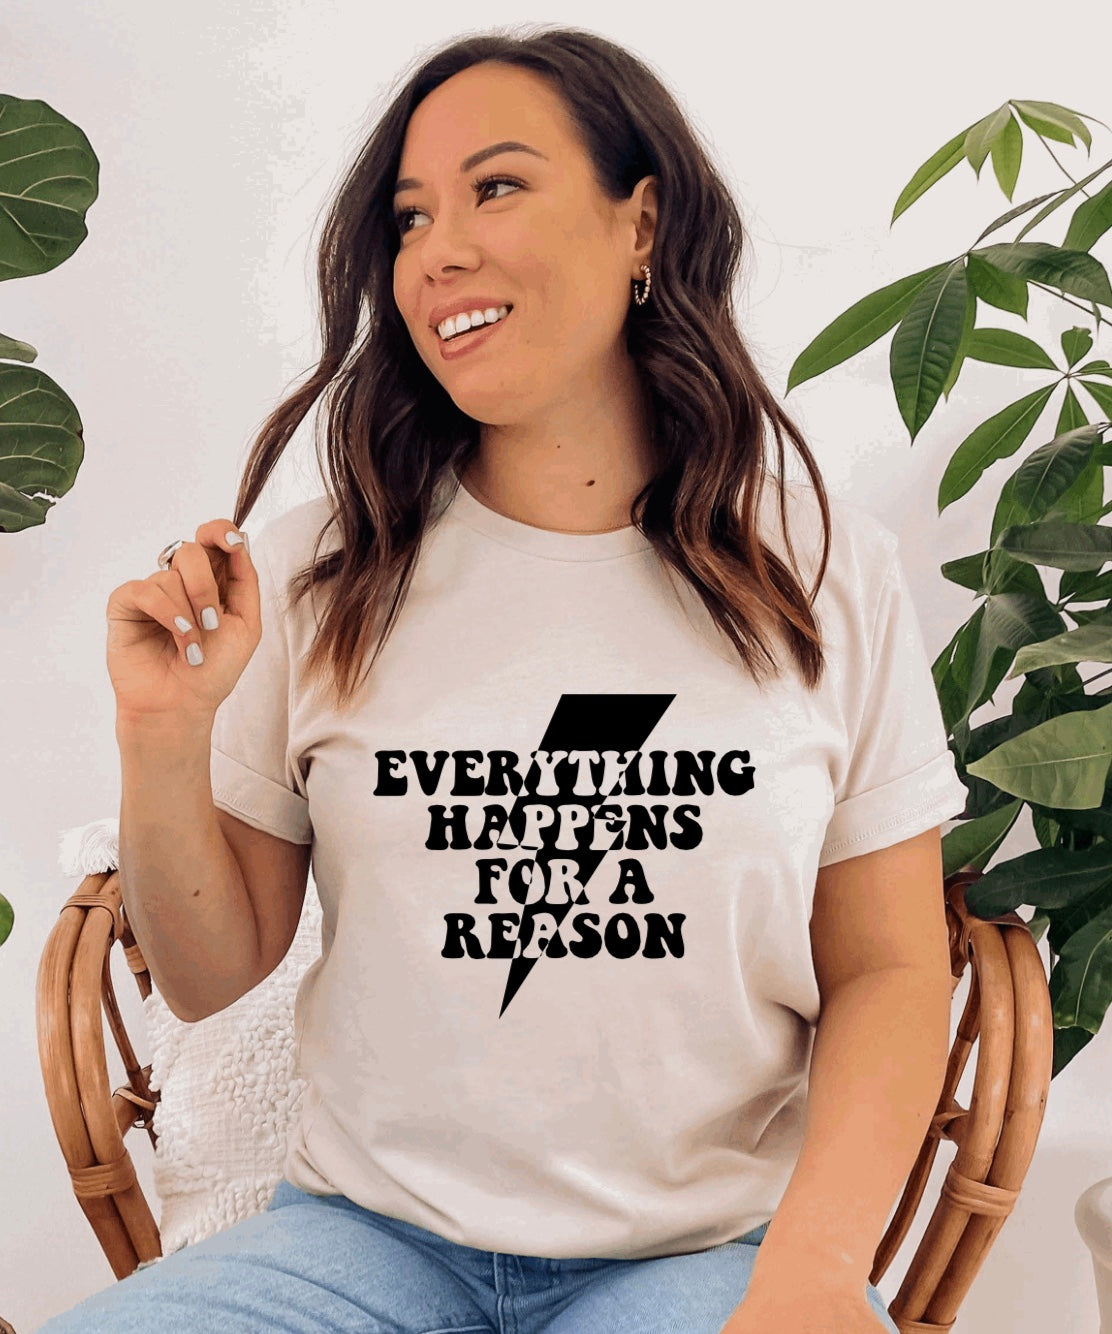 Everything Happens for a Reason- Retro lightening t-shirt